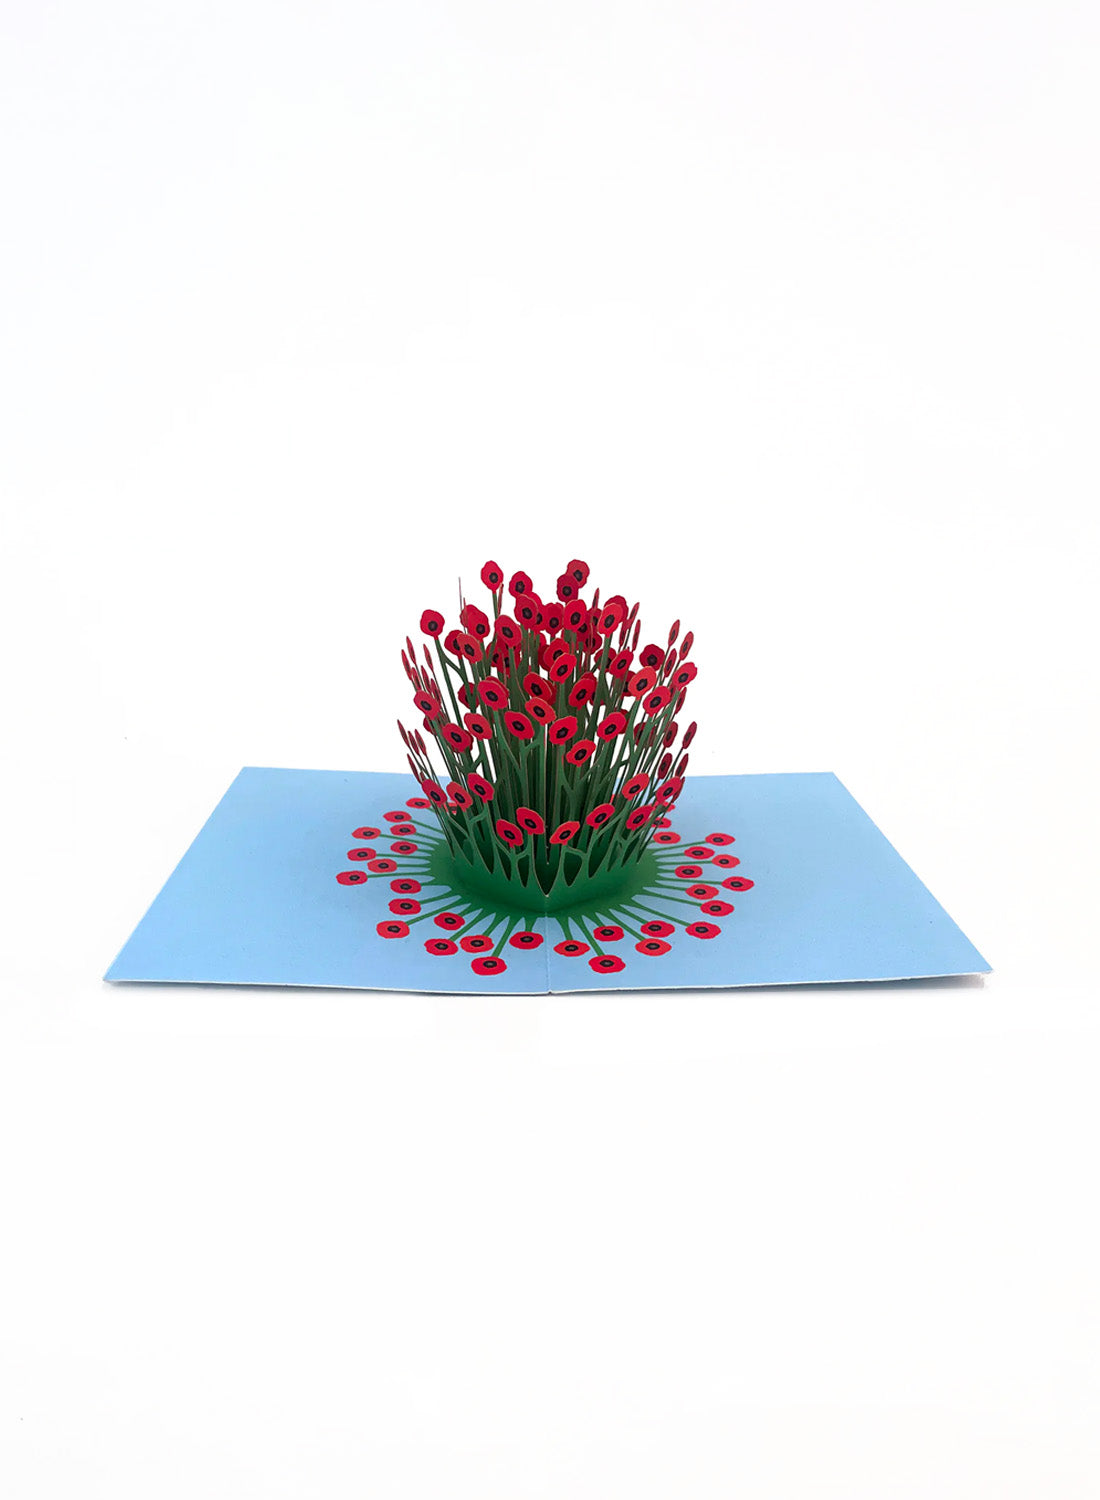 Blooming Poppies Pop Up Card